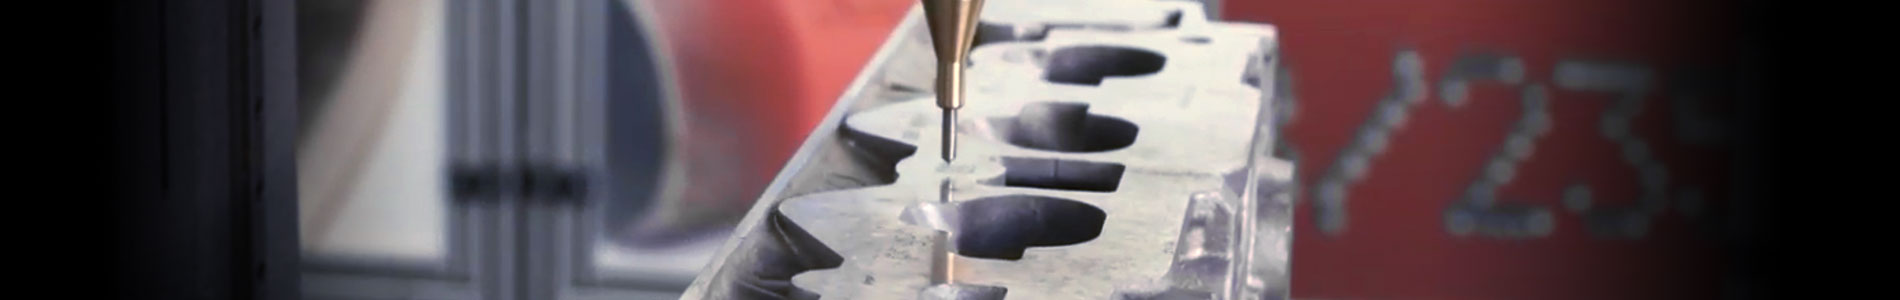 Aerospace component marking and traceability solutions